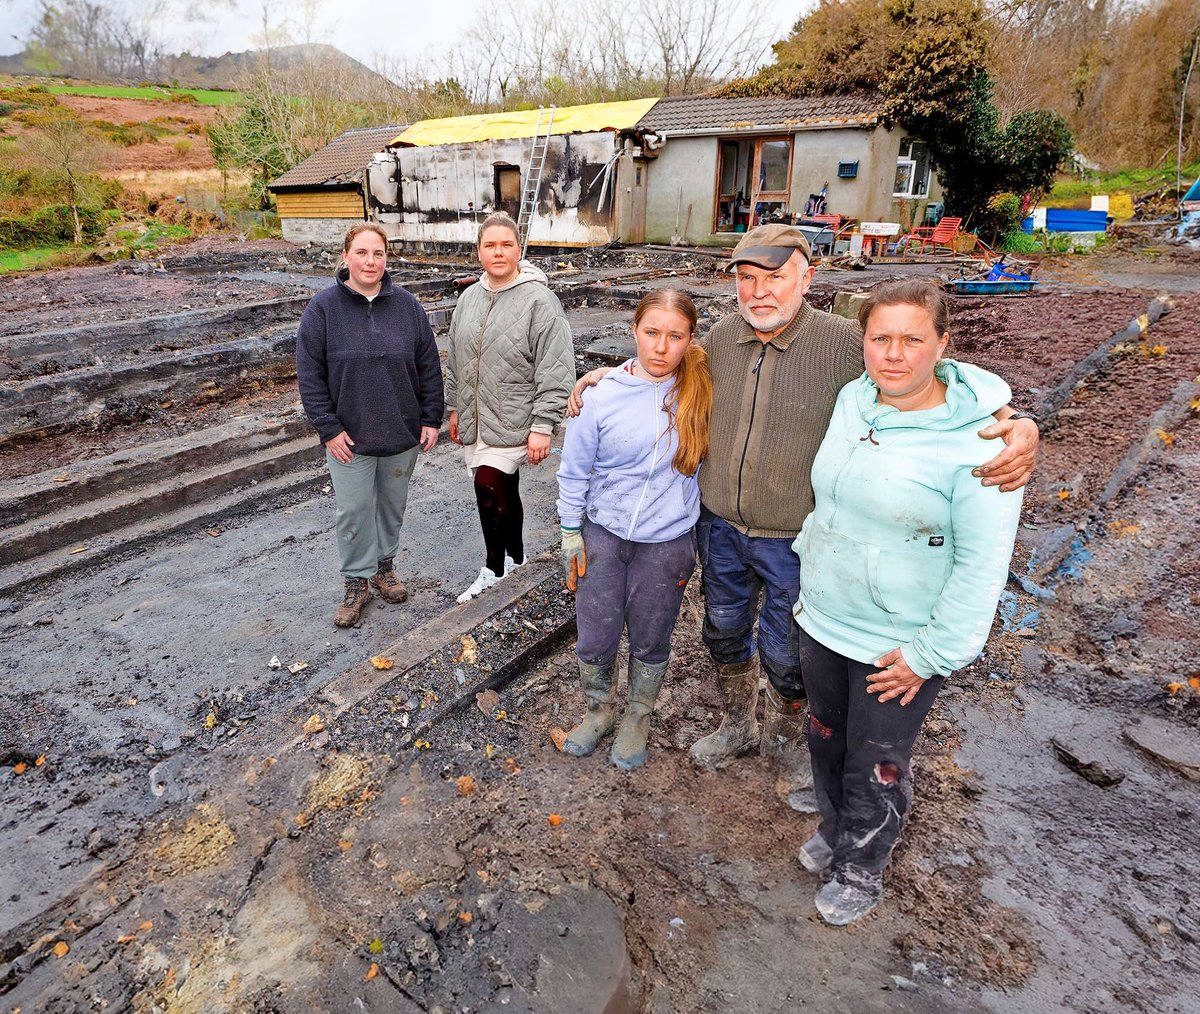 A 74-year-old who built his house from scratch after moving to Kerry from Amsterdam in the 1970s is now homeless - after a fire destroyed everything he owns. To donate, visit buff.ly/4aFM0D8 Community rallies for fire-stricken family in tomorrow’s Kerry’s Eye